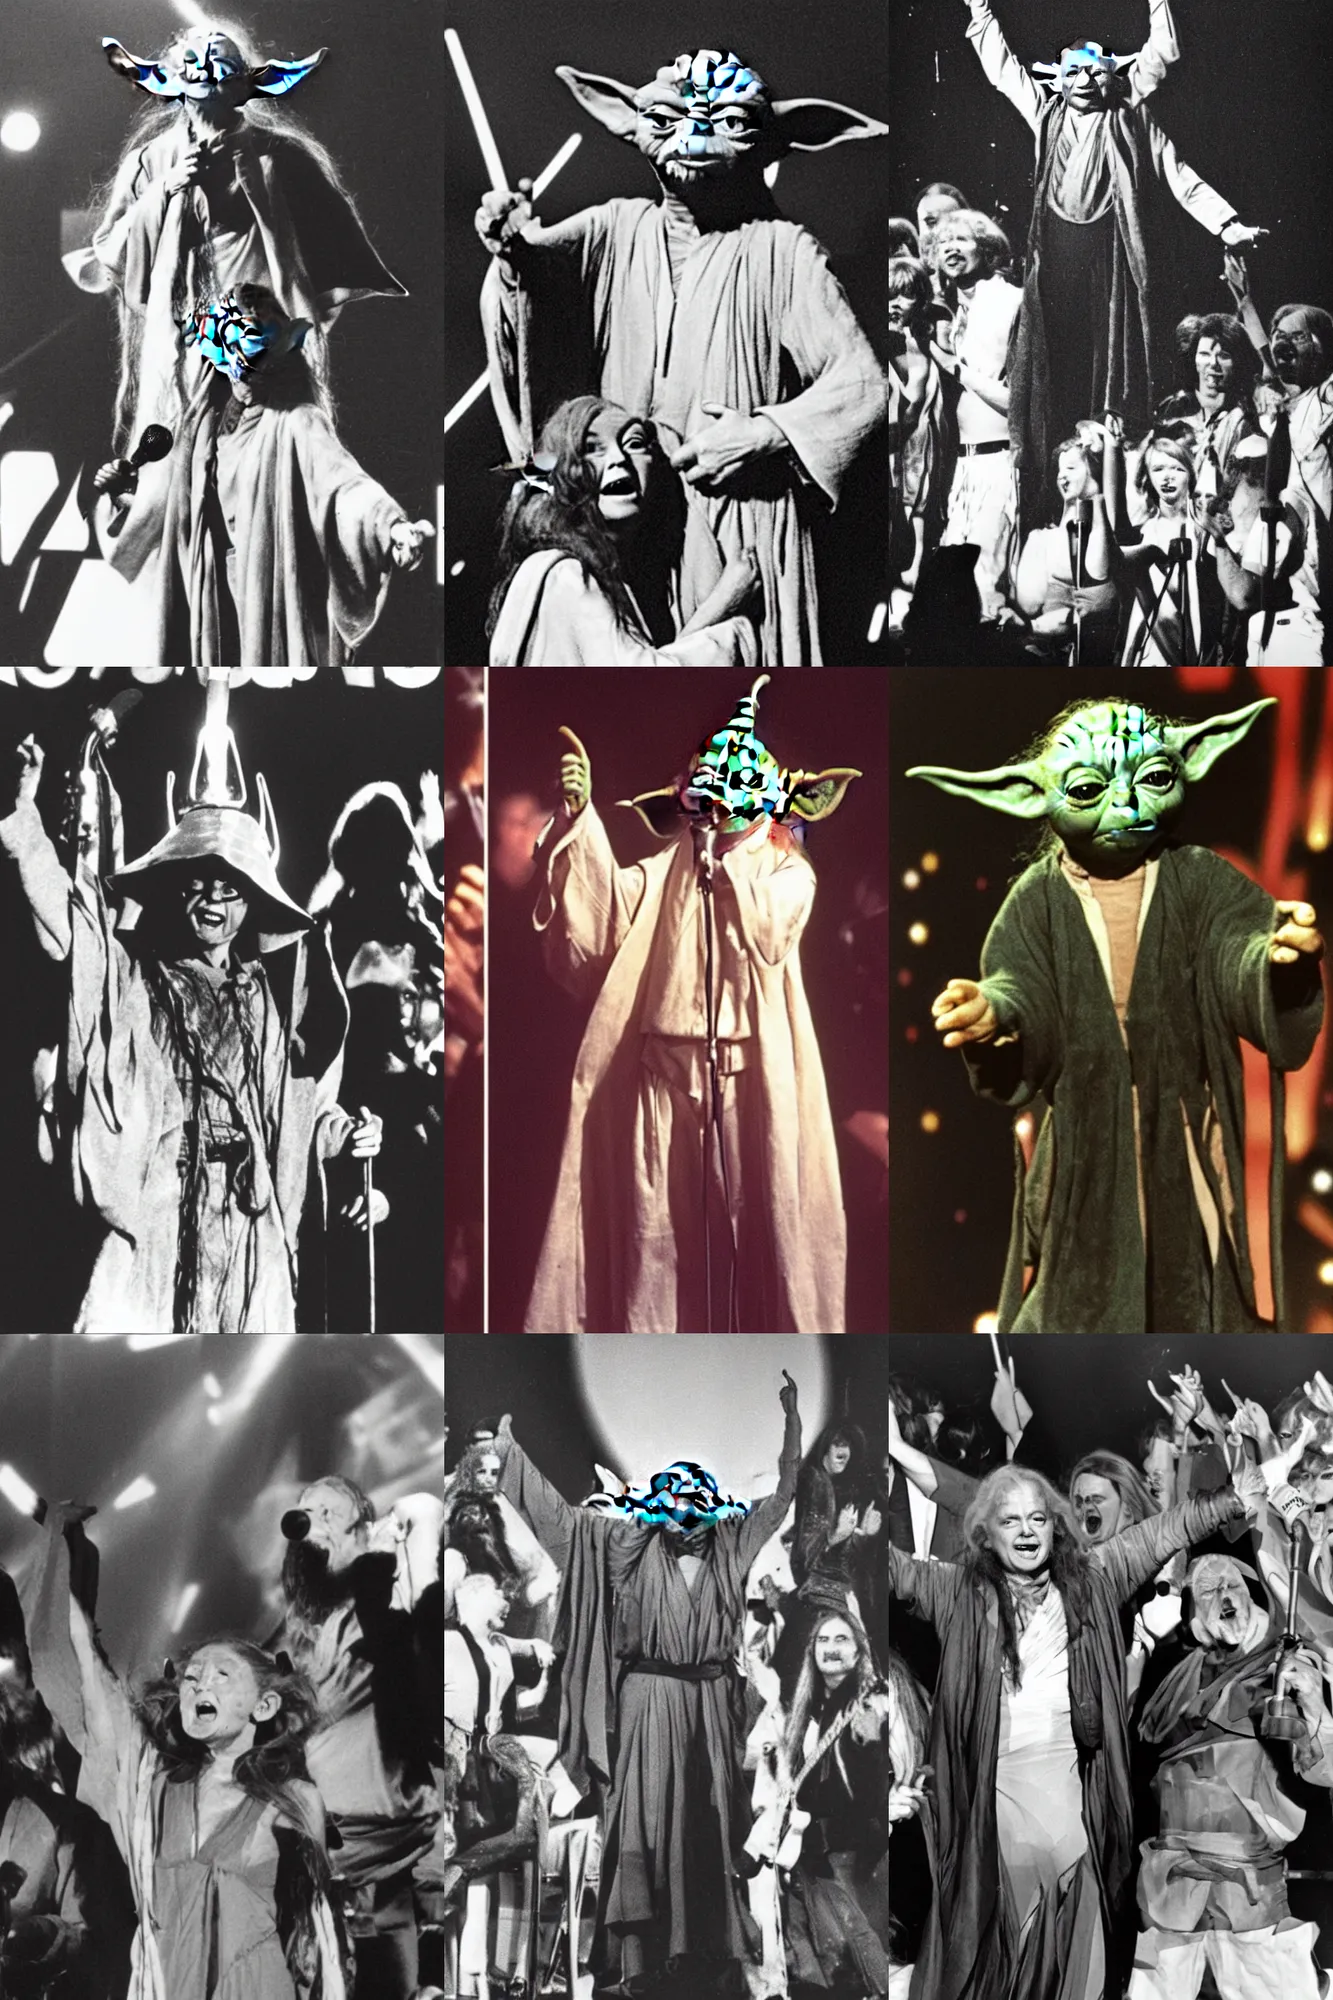 Prompt: photo of yoda winning eurovision song contest and celebrating on stage in the 70s